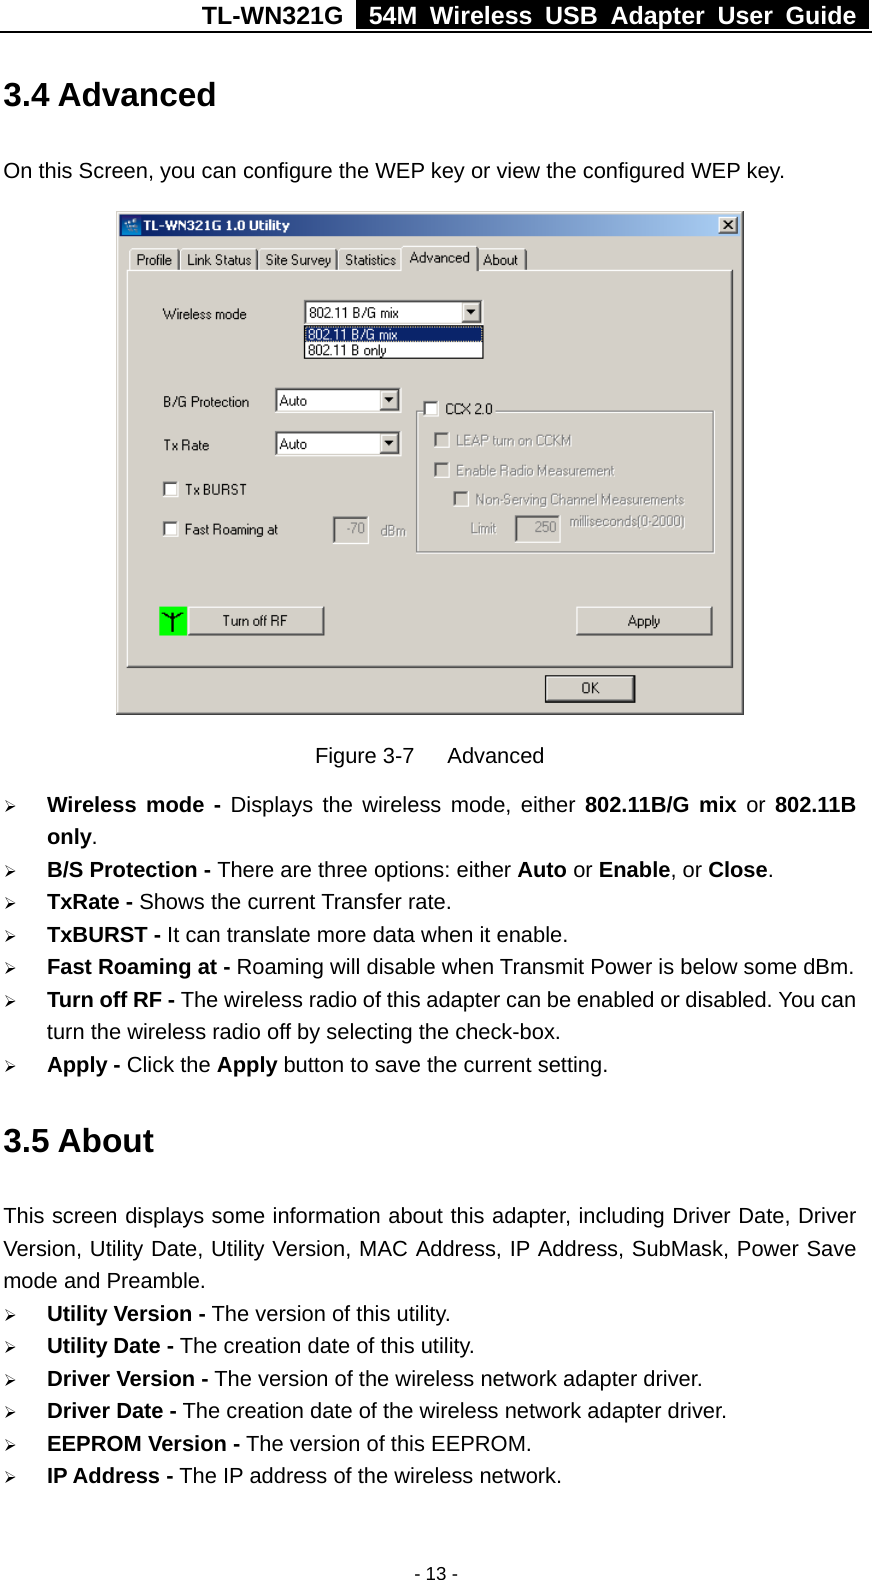 TL-WN321G   54M Wireless USB Adapter User Guide  3.4 Advanced On this Screen, you can configure the WEP key or view the configured WEP key.  Figure 3-7   Advanced   Wireless mode - Displays the wireless mode, either 802.11B/G mix or 802.11B only.    B/S Protection - There are three options: either Auto or Enable, or Close.   TxRate - Shows the current Transfer rate.   TxBURST - It can translate more data when it enable.   Fast Roaming at - Roaming will disable when Transmit Power is below some dBm.   Turn off RF - The wireless radio of this adapter can be enabled or disabled. You can turn the wireless radio off by selecting the check-box.   Apply - Click the Apply button to save the current setting. 3.5 About This screen displays some information about this adapter, including Driver Date, Driver Version, Utility Date, Utility Version, MAC Address, IP Address, SubMask, Power Save mode and Preamble.     Utility Version - The version of this utility.   Utility Date - The creation date of this utility.   Driver Version - The version of the wireless network adapter driver.   Driver Date - The creation date of the wireless network adapter driver.   EEPROM Version - The version of this EEPROM.   IP Address - The IP address of the wireless network. - 13 -